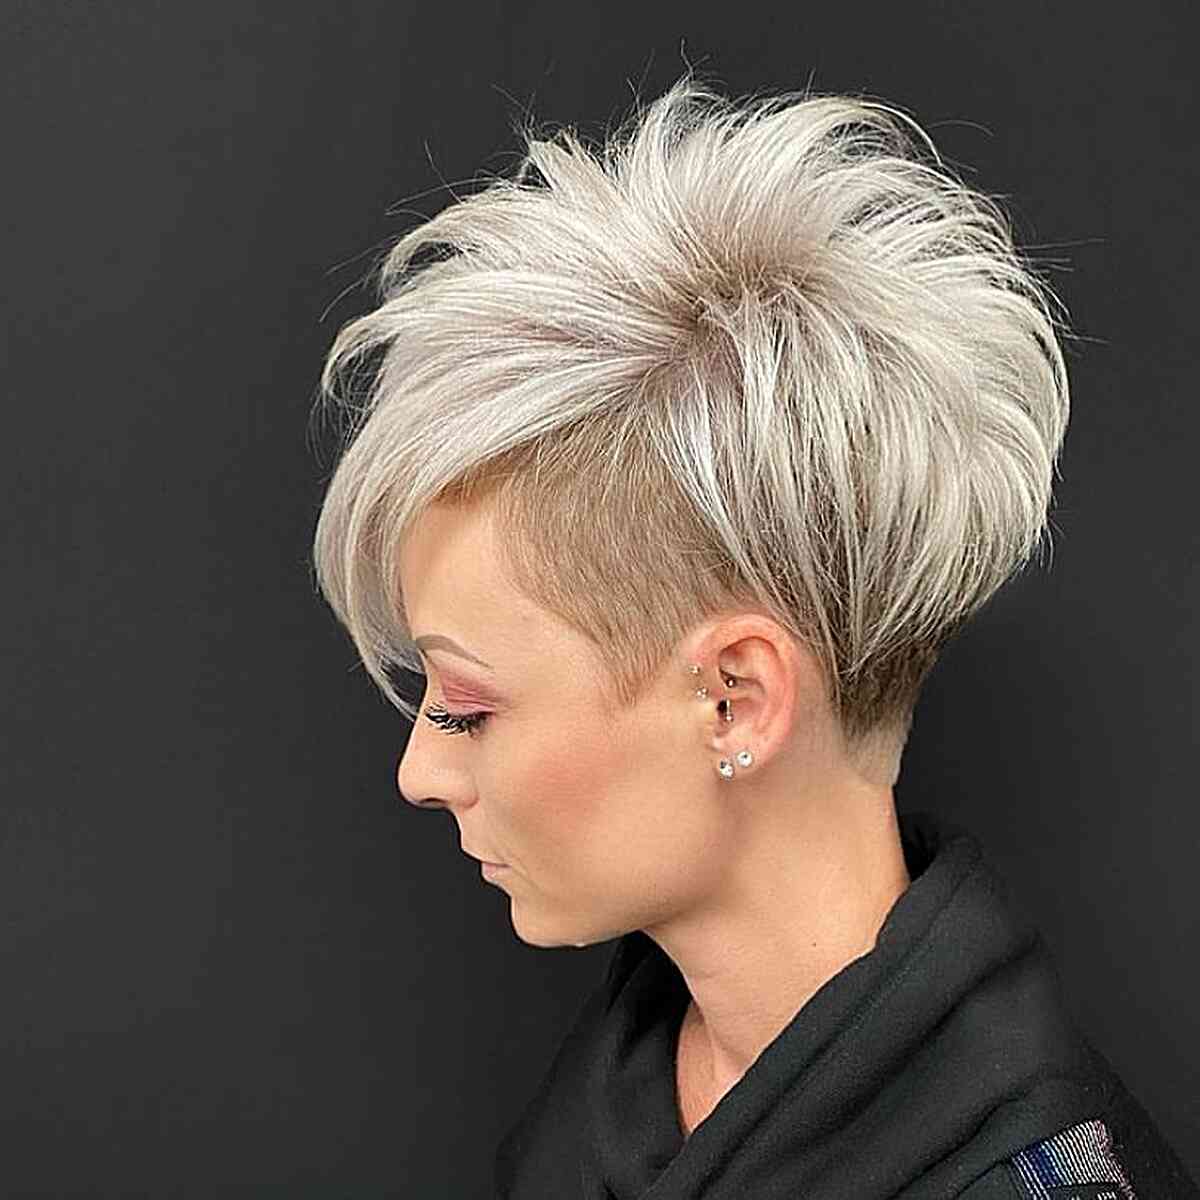 Short Asymmetric Hair with a Shaved Side